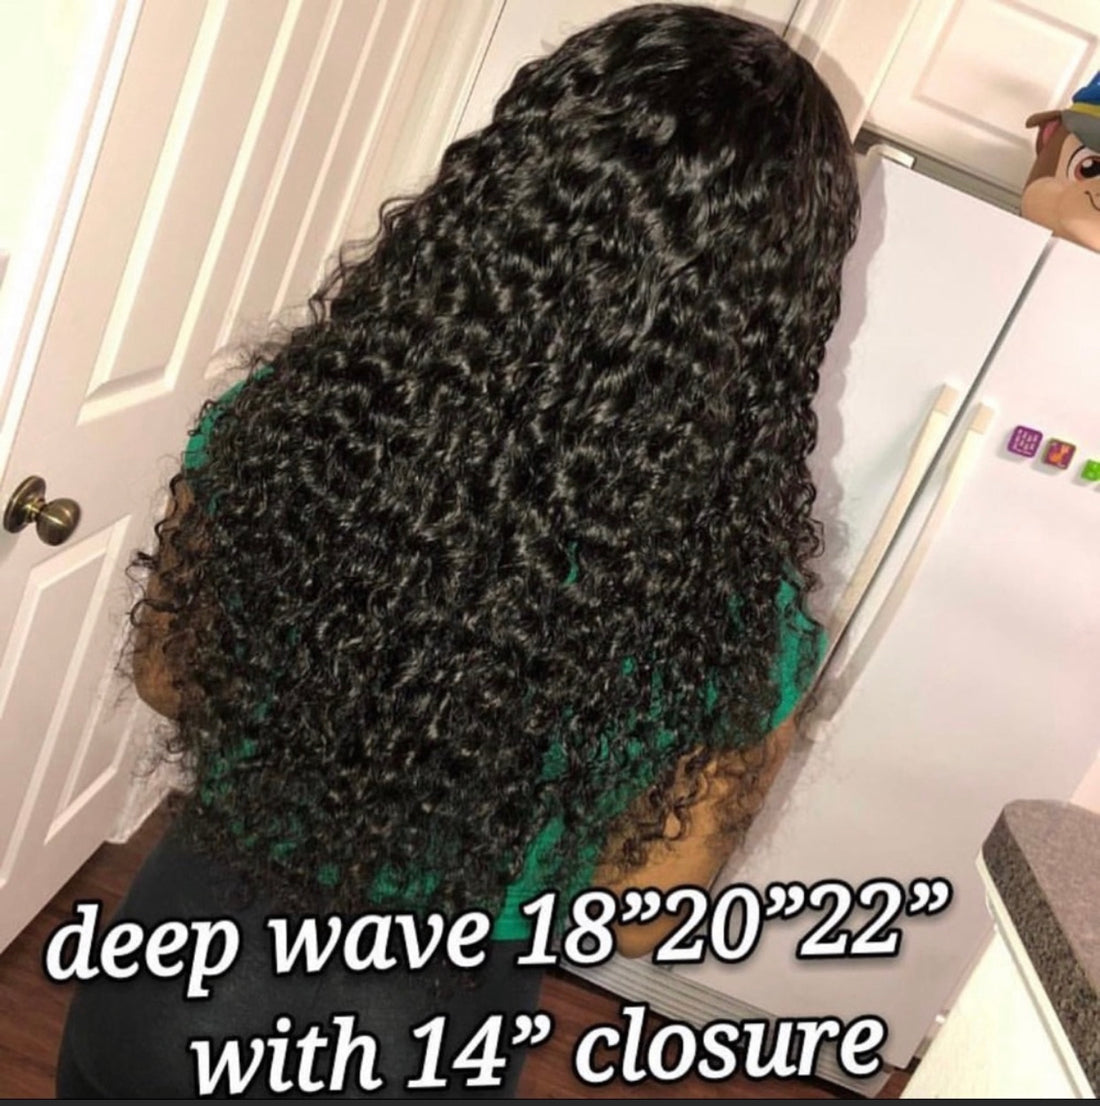 Deep wave hair extension curly